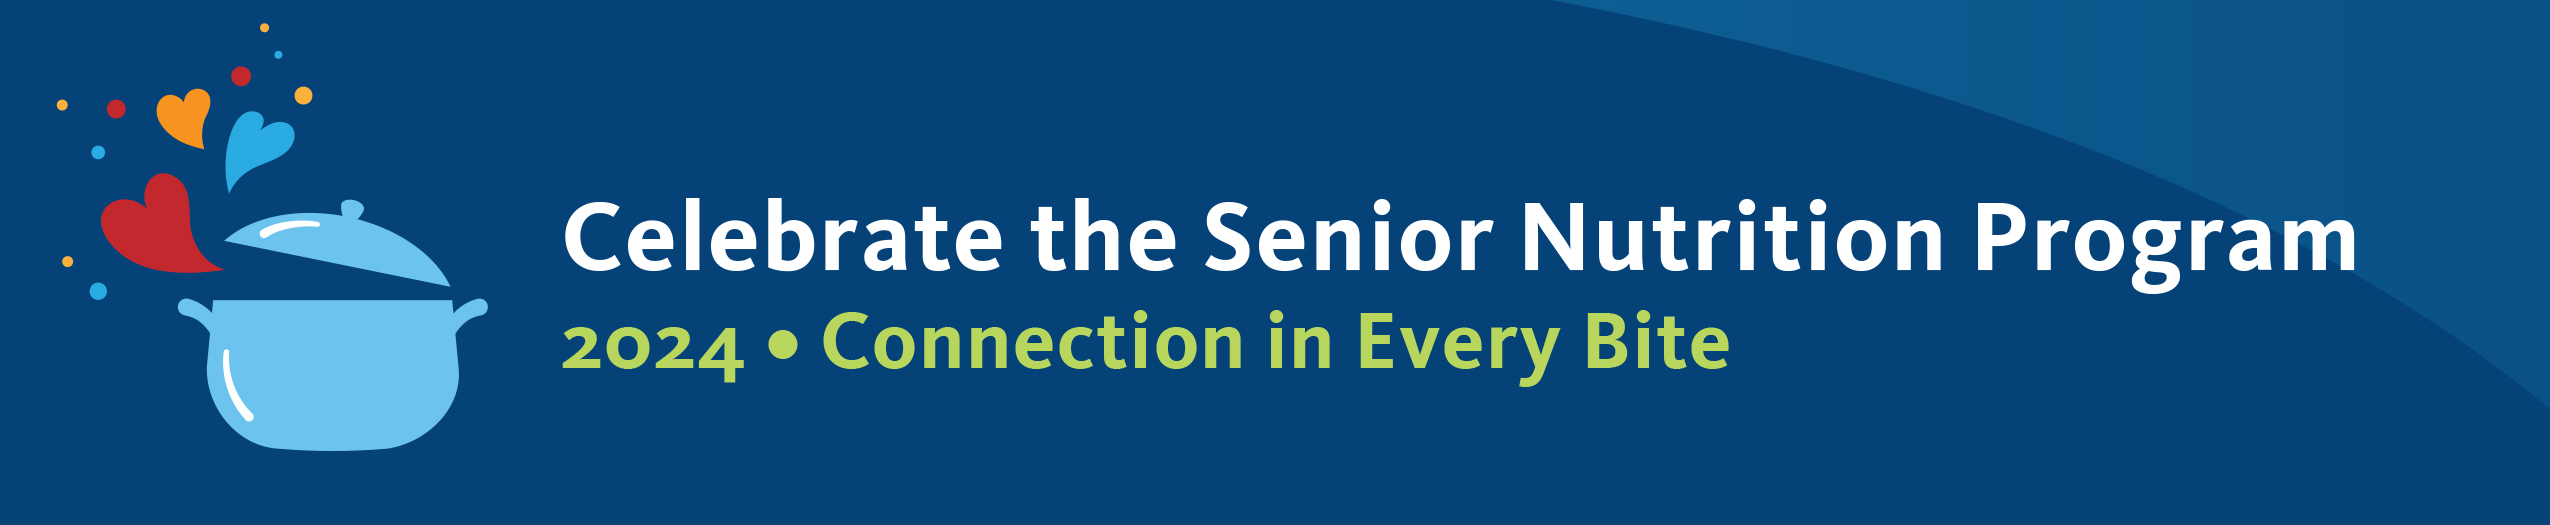 Celebrate the Senior Nutrition Program. 2024: Connection in Every Bite